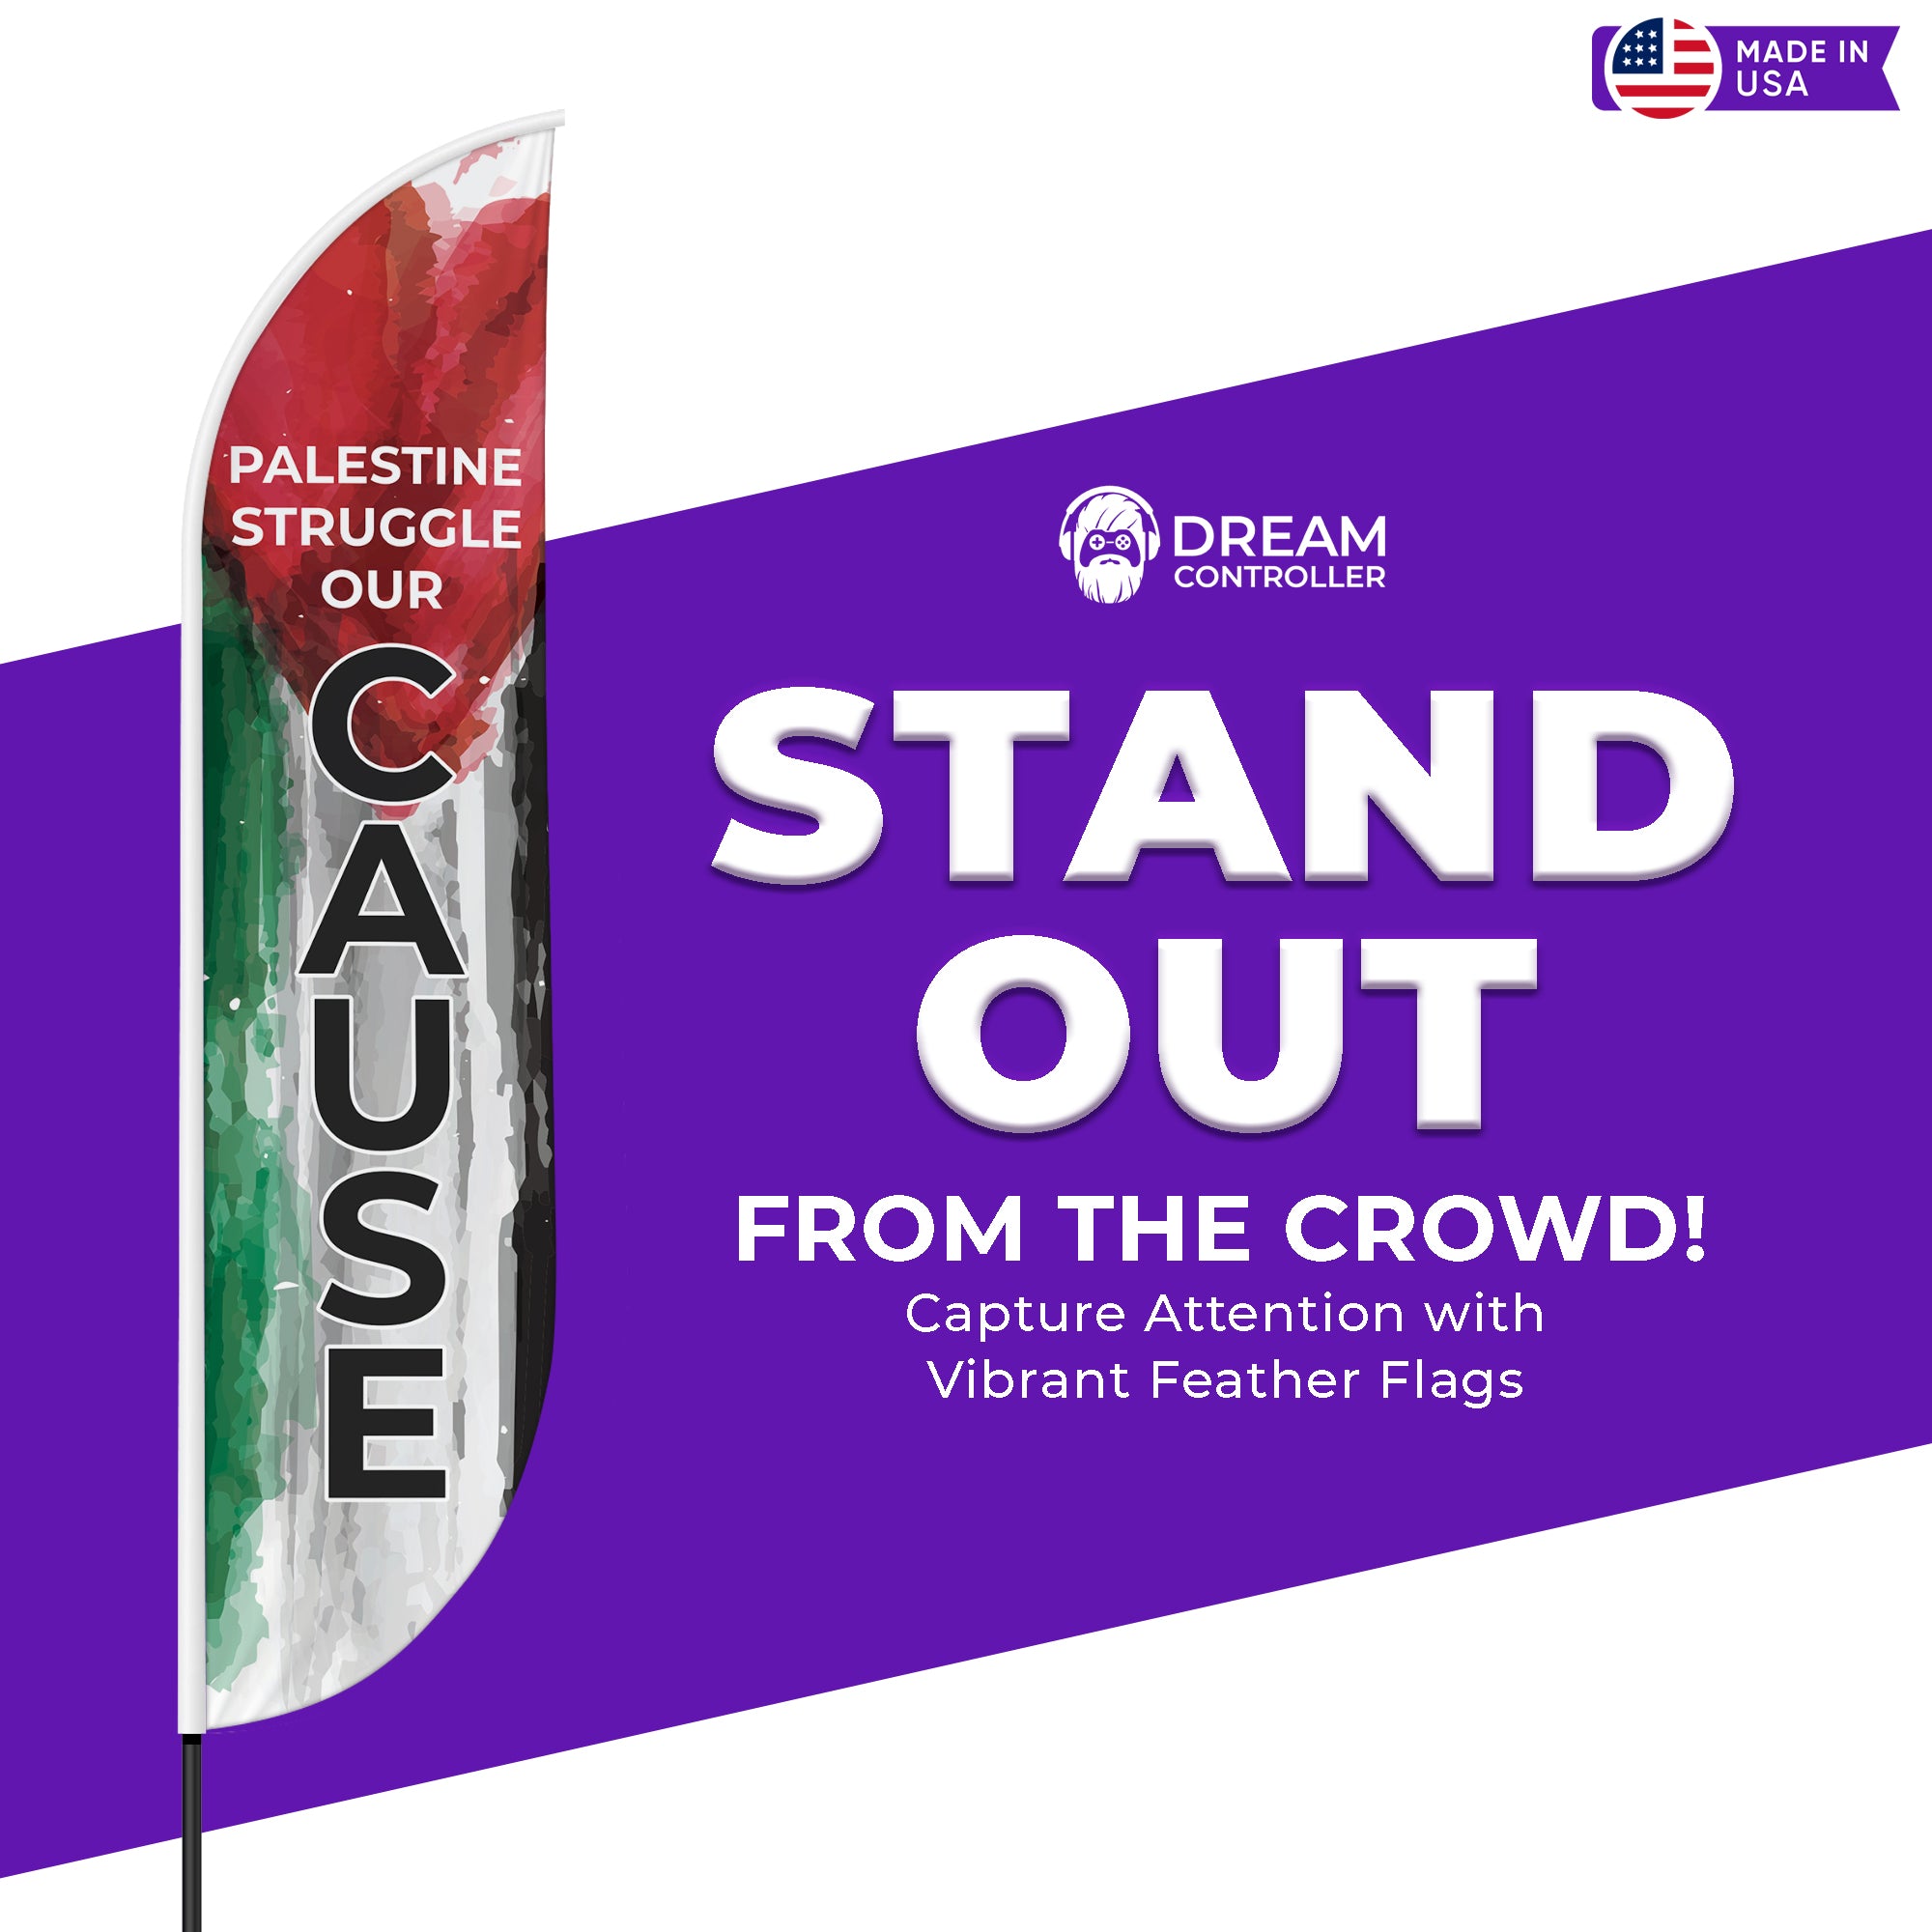 'Palestine's Struggle, Our Cause' Feather Flag – Unite with Premium Quality and Versatility